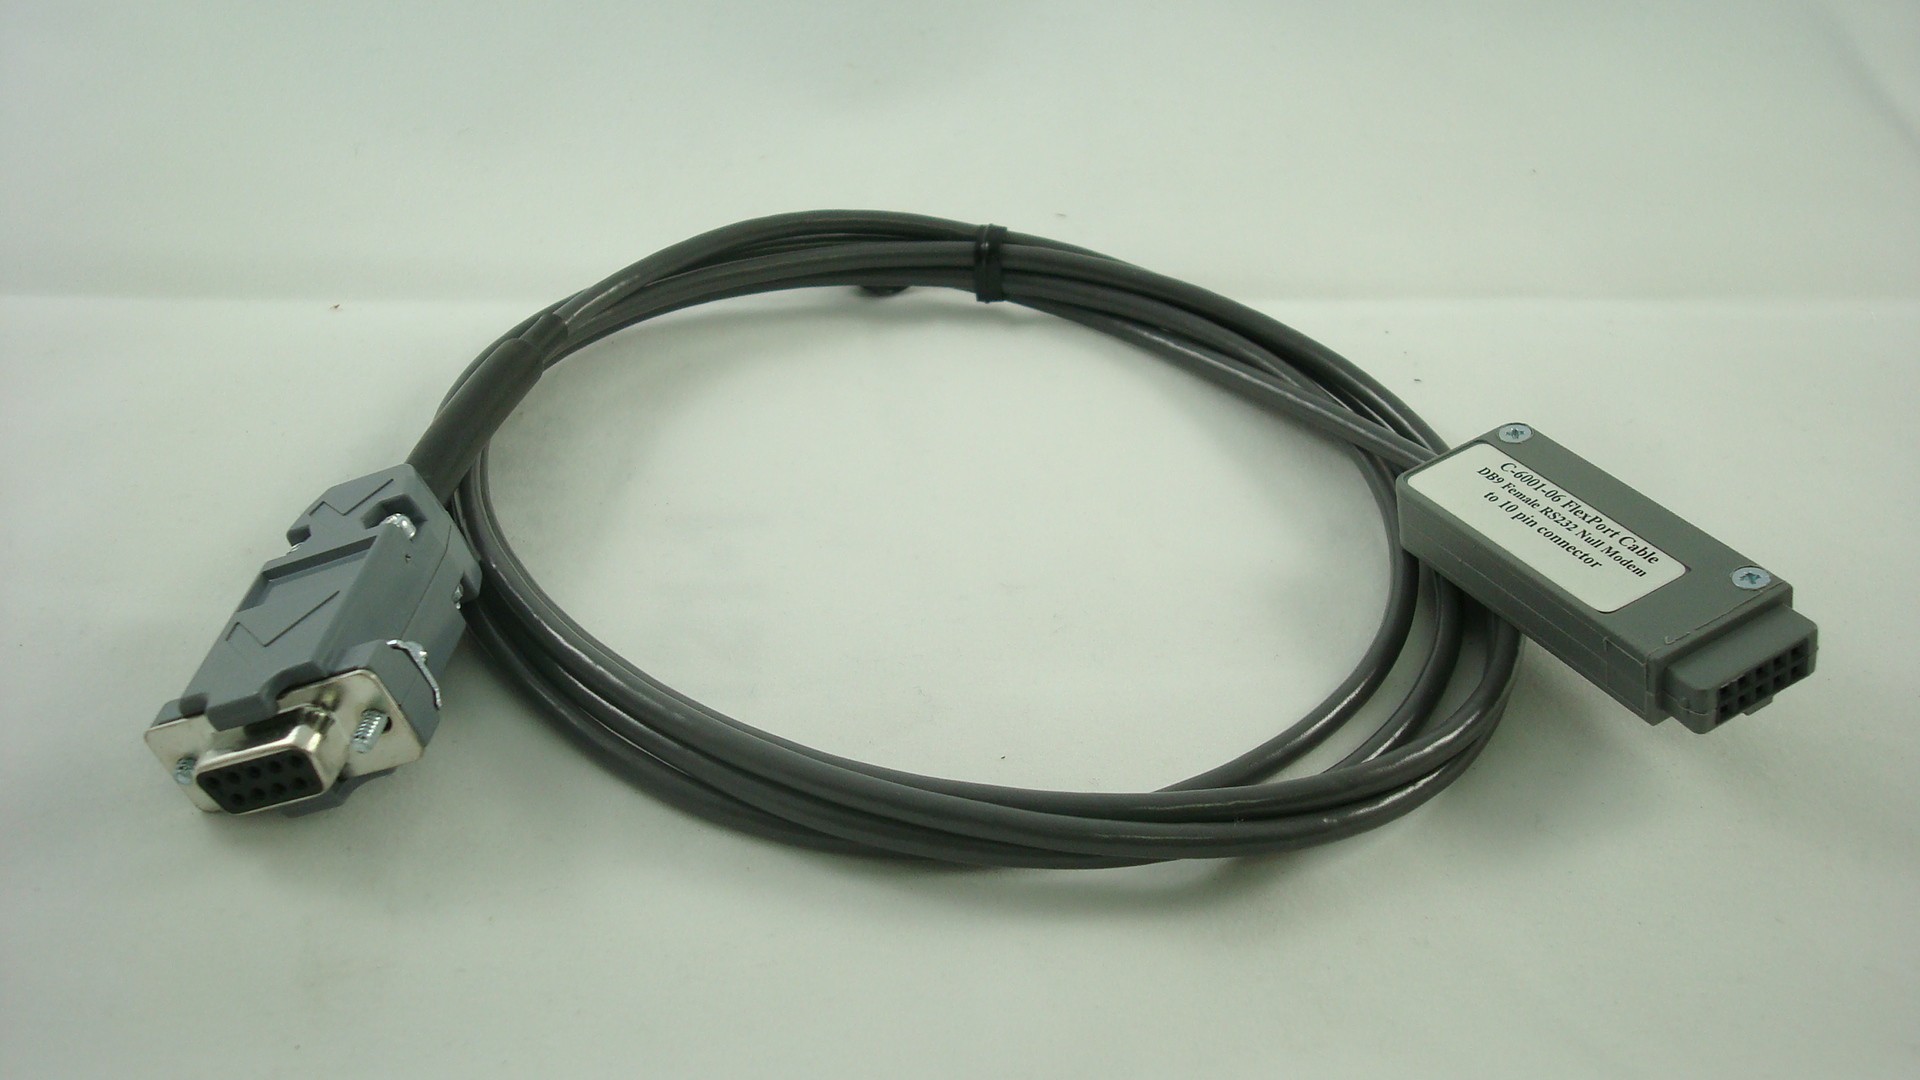 C-6051-06 RS232 DB9 Female Null Modem without Handshaking to 10 pin connector (6 ft)